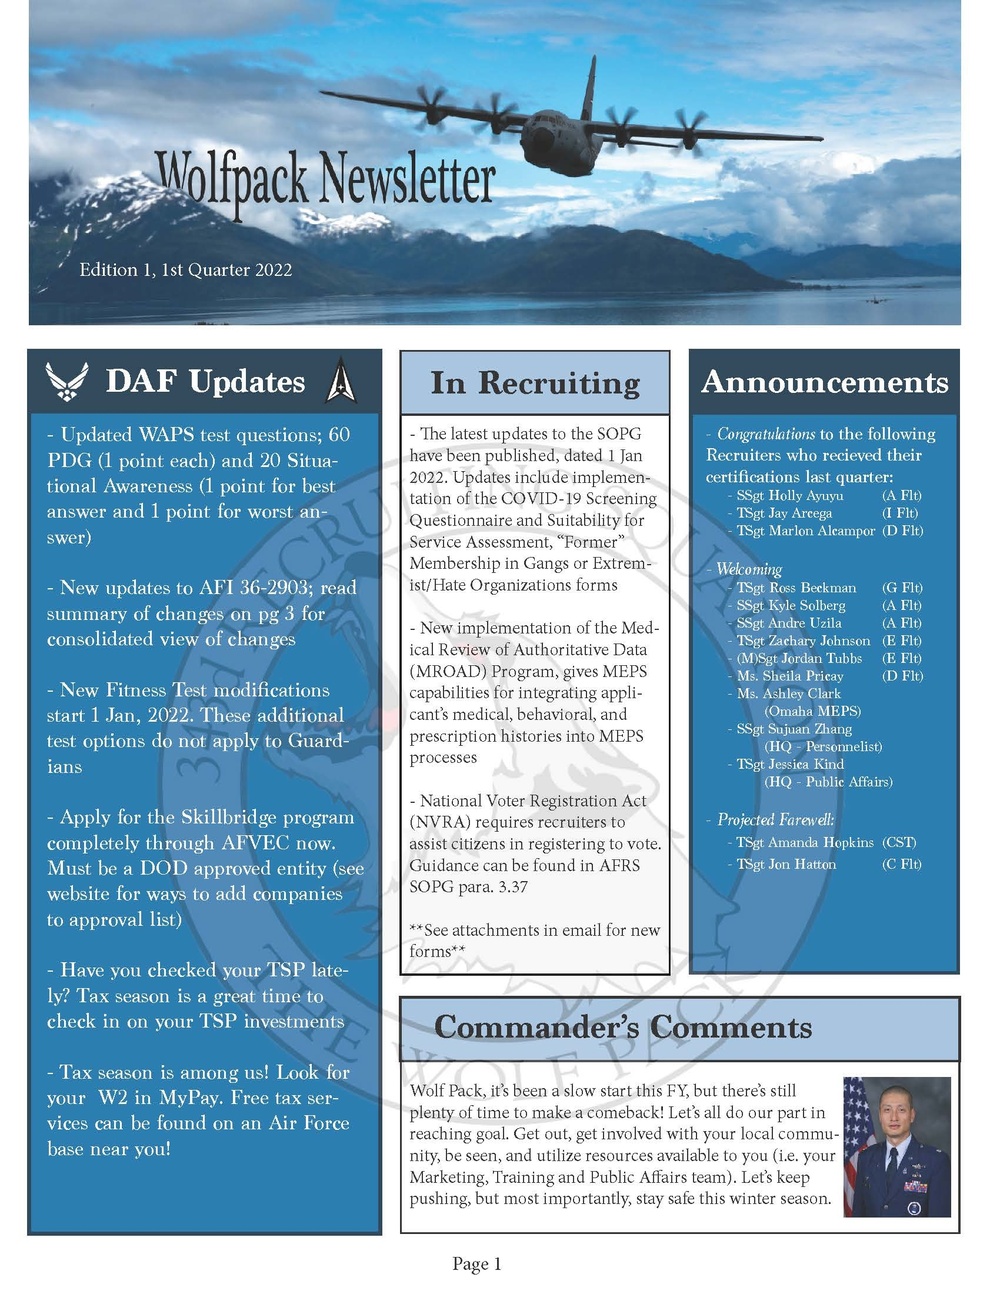 Wolfpack Newsletter; Edition 1